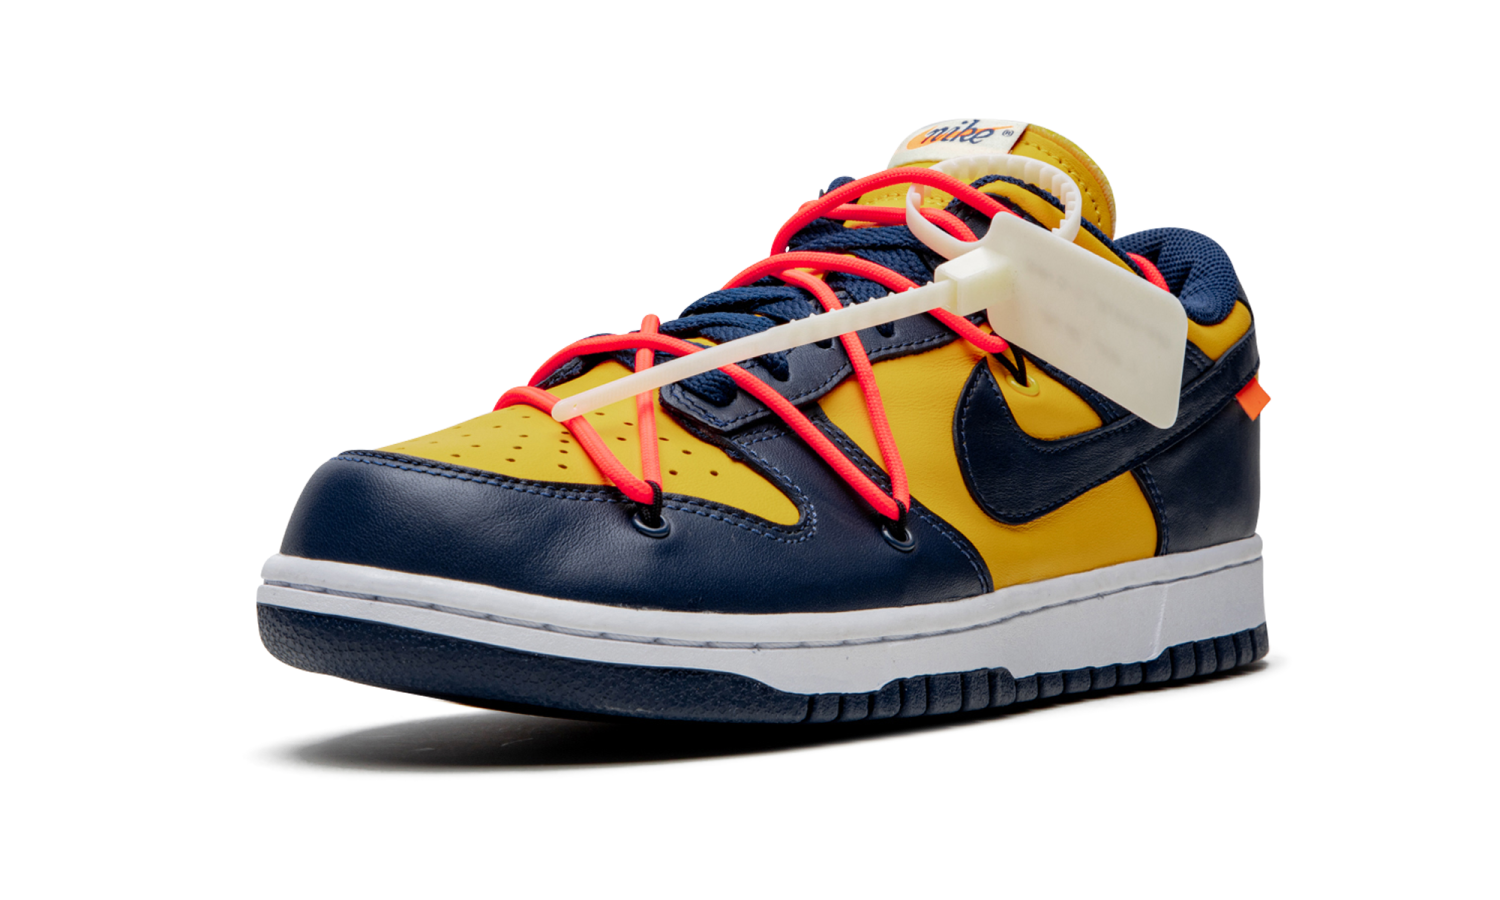 фото Dunk Low “Off-White - University Gold” (Nike Dunk Low)-CT0856 700